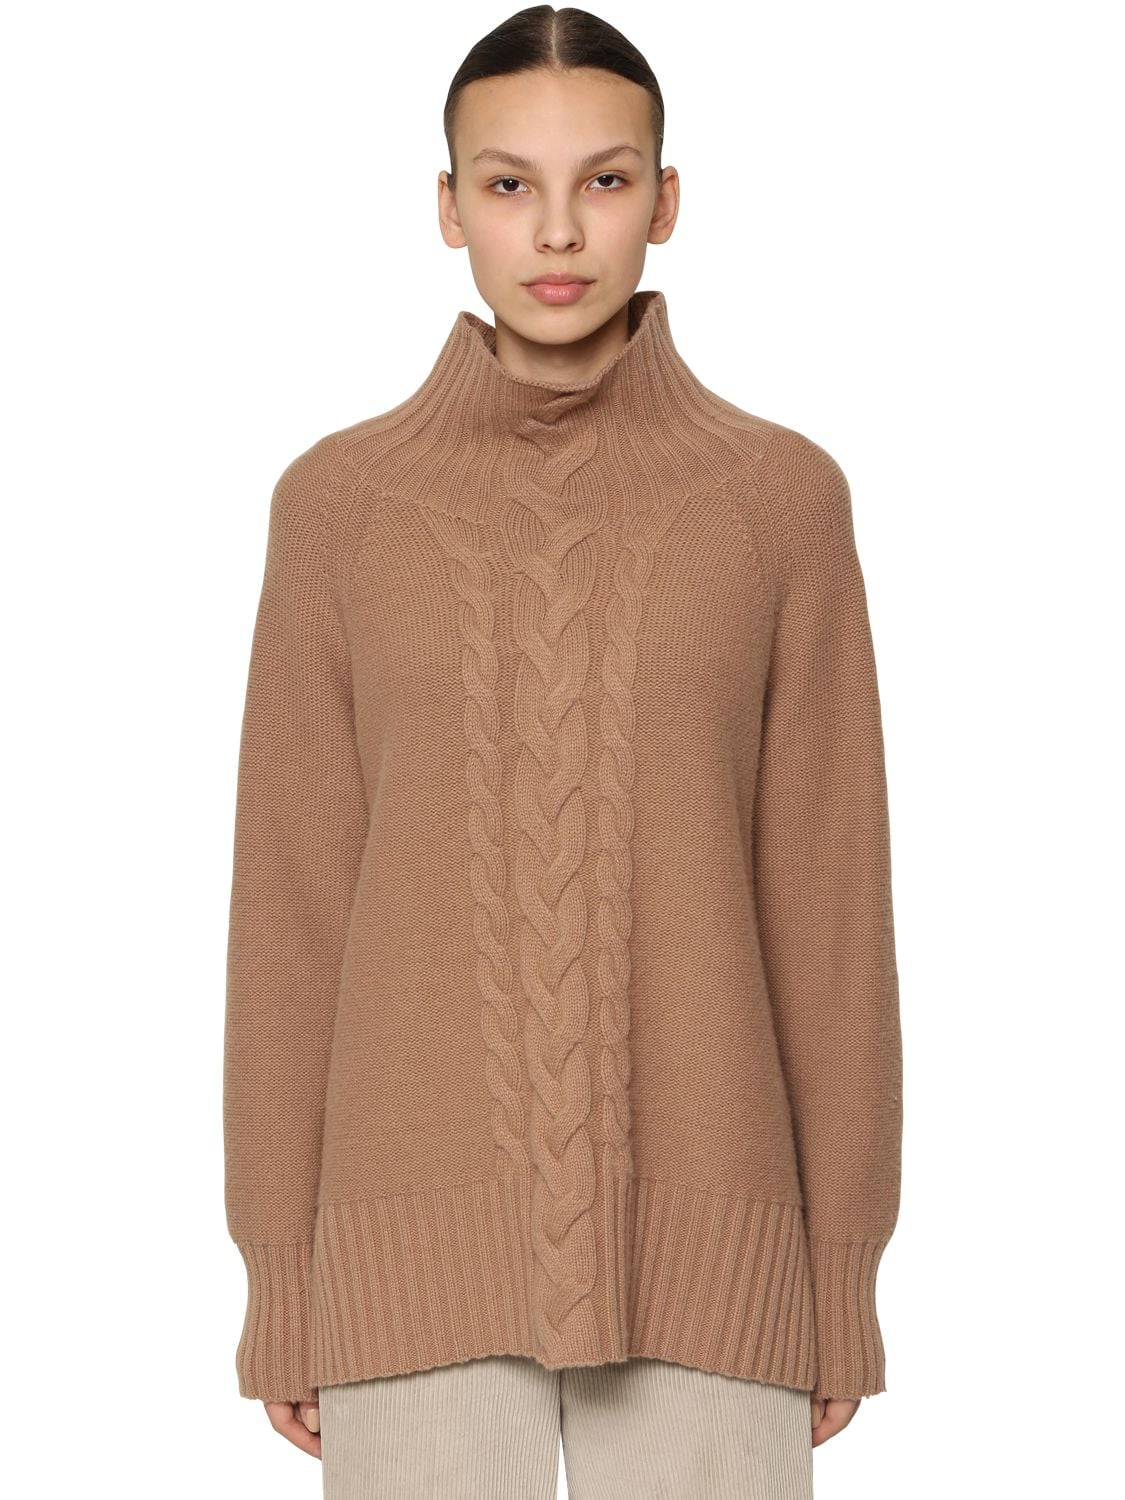 MAX MARA WOOL & CASHMERE CABLE KNIT jumper,70I519018-MDE20